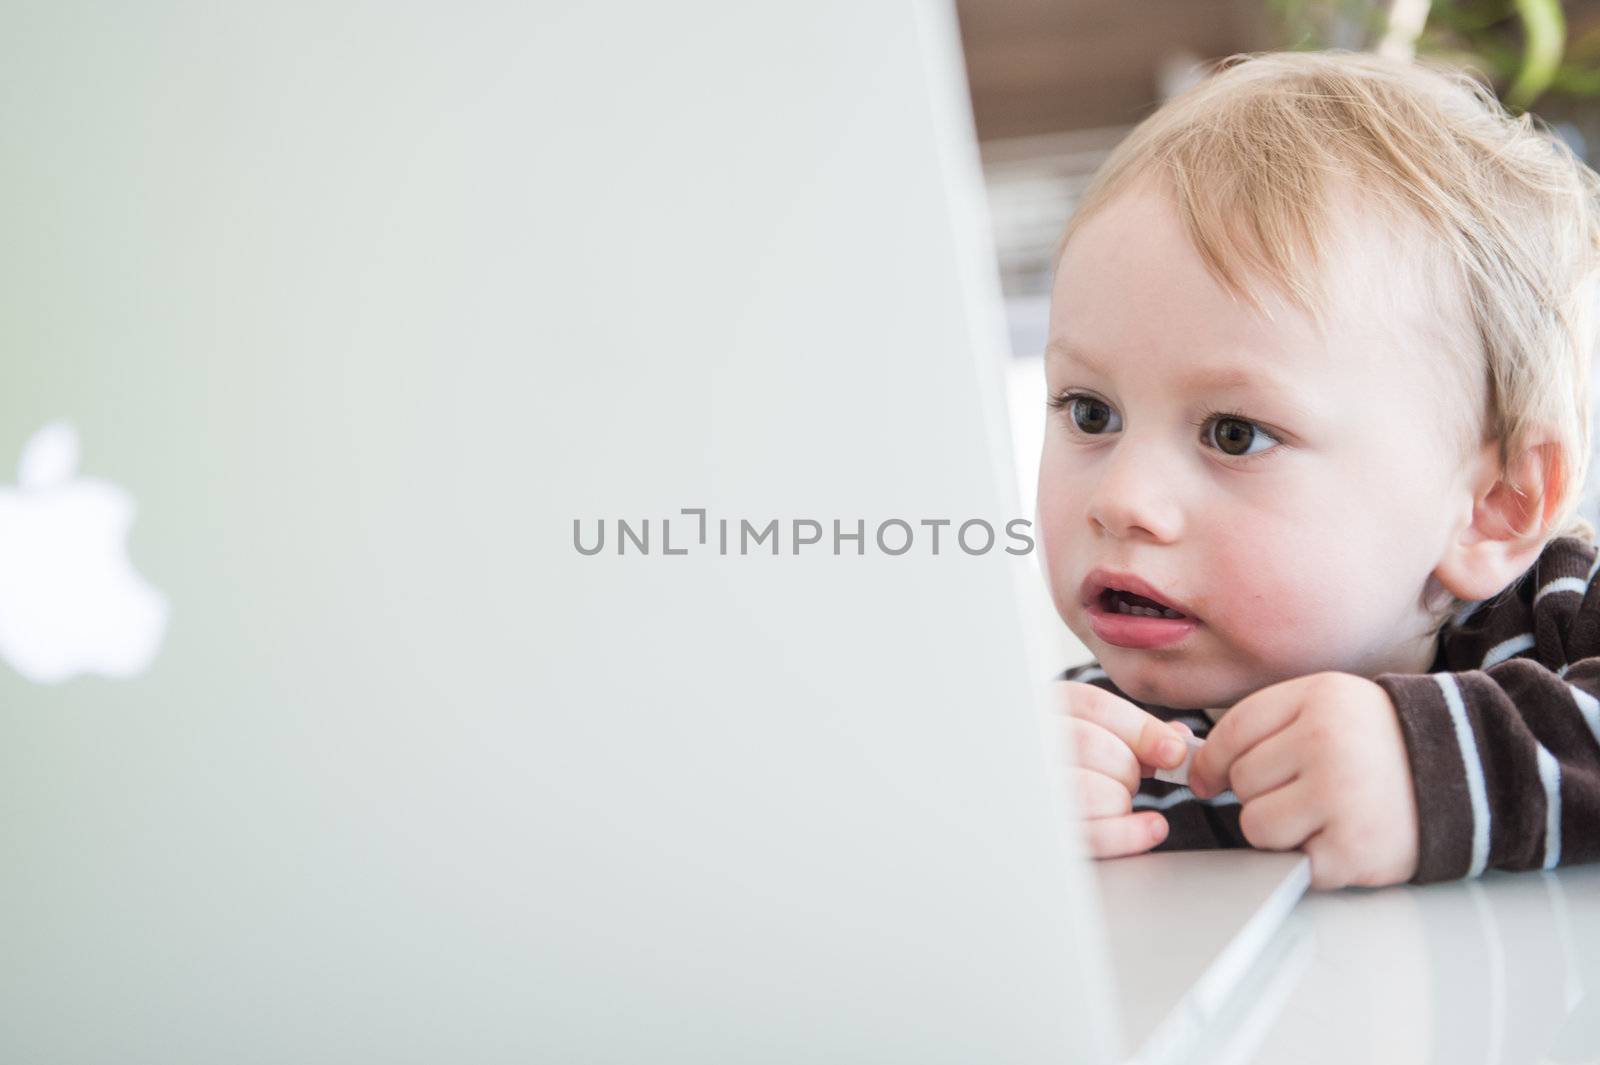 SALZBURG, JAN 23: Two years old Boy Lorenz, symbolic for the apple generation, looking at new apple macbook pro retina, on January 23 2013, in Salzburg, Austria